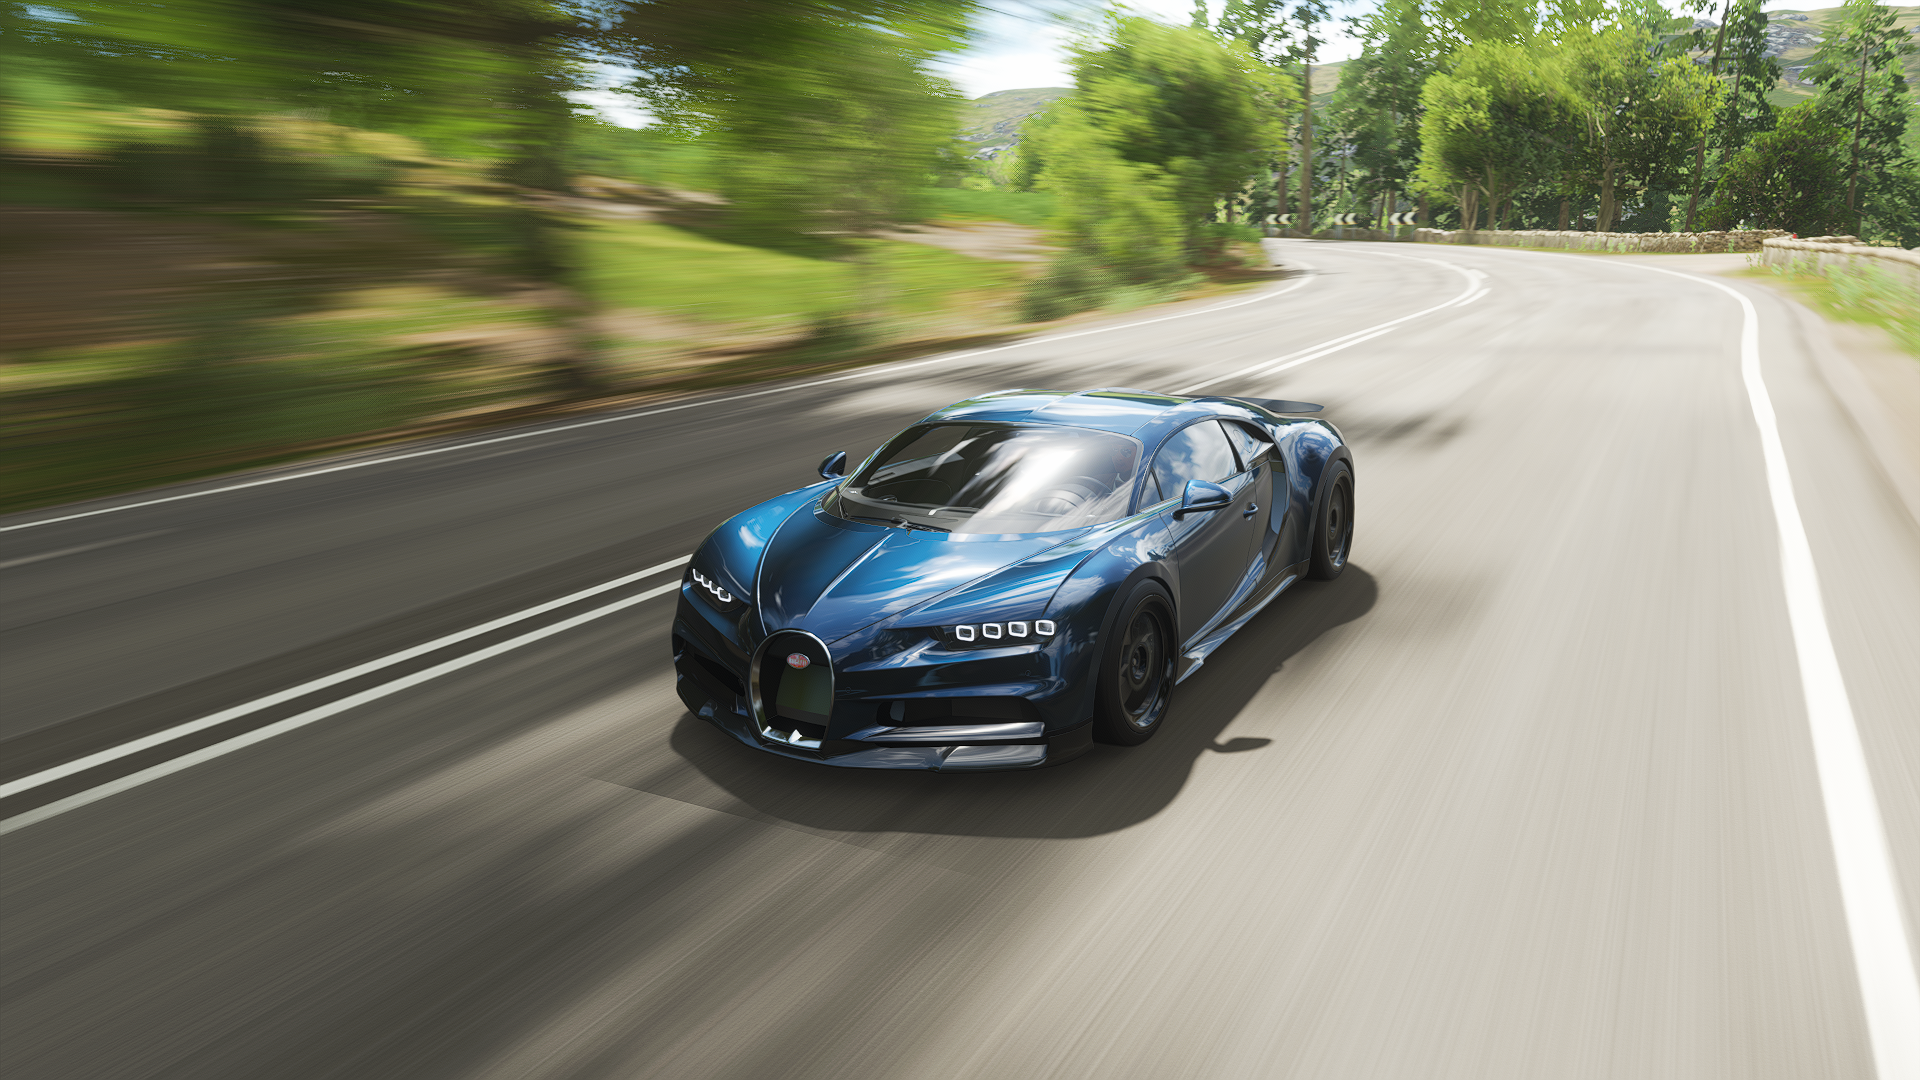 General 1920x1080 Forza Forza Horizon Forza Horizon 4 racing car CGI Bugatti Chiron road video games headlights frontal view trees blurred blurry background PlaygroundGames Bugatti French Cars Volkswagen Group Hypercar